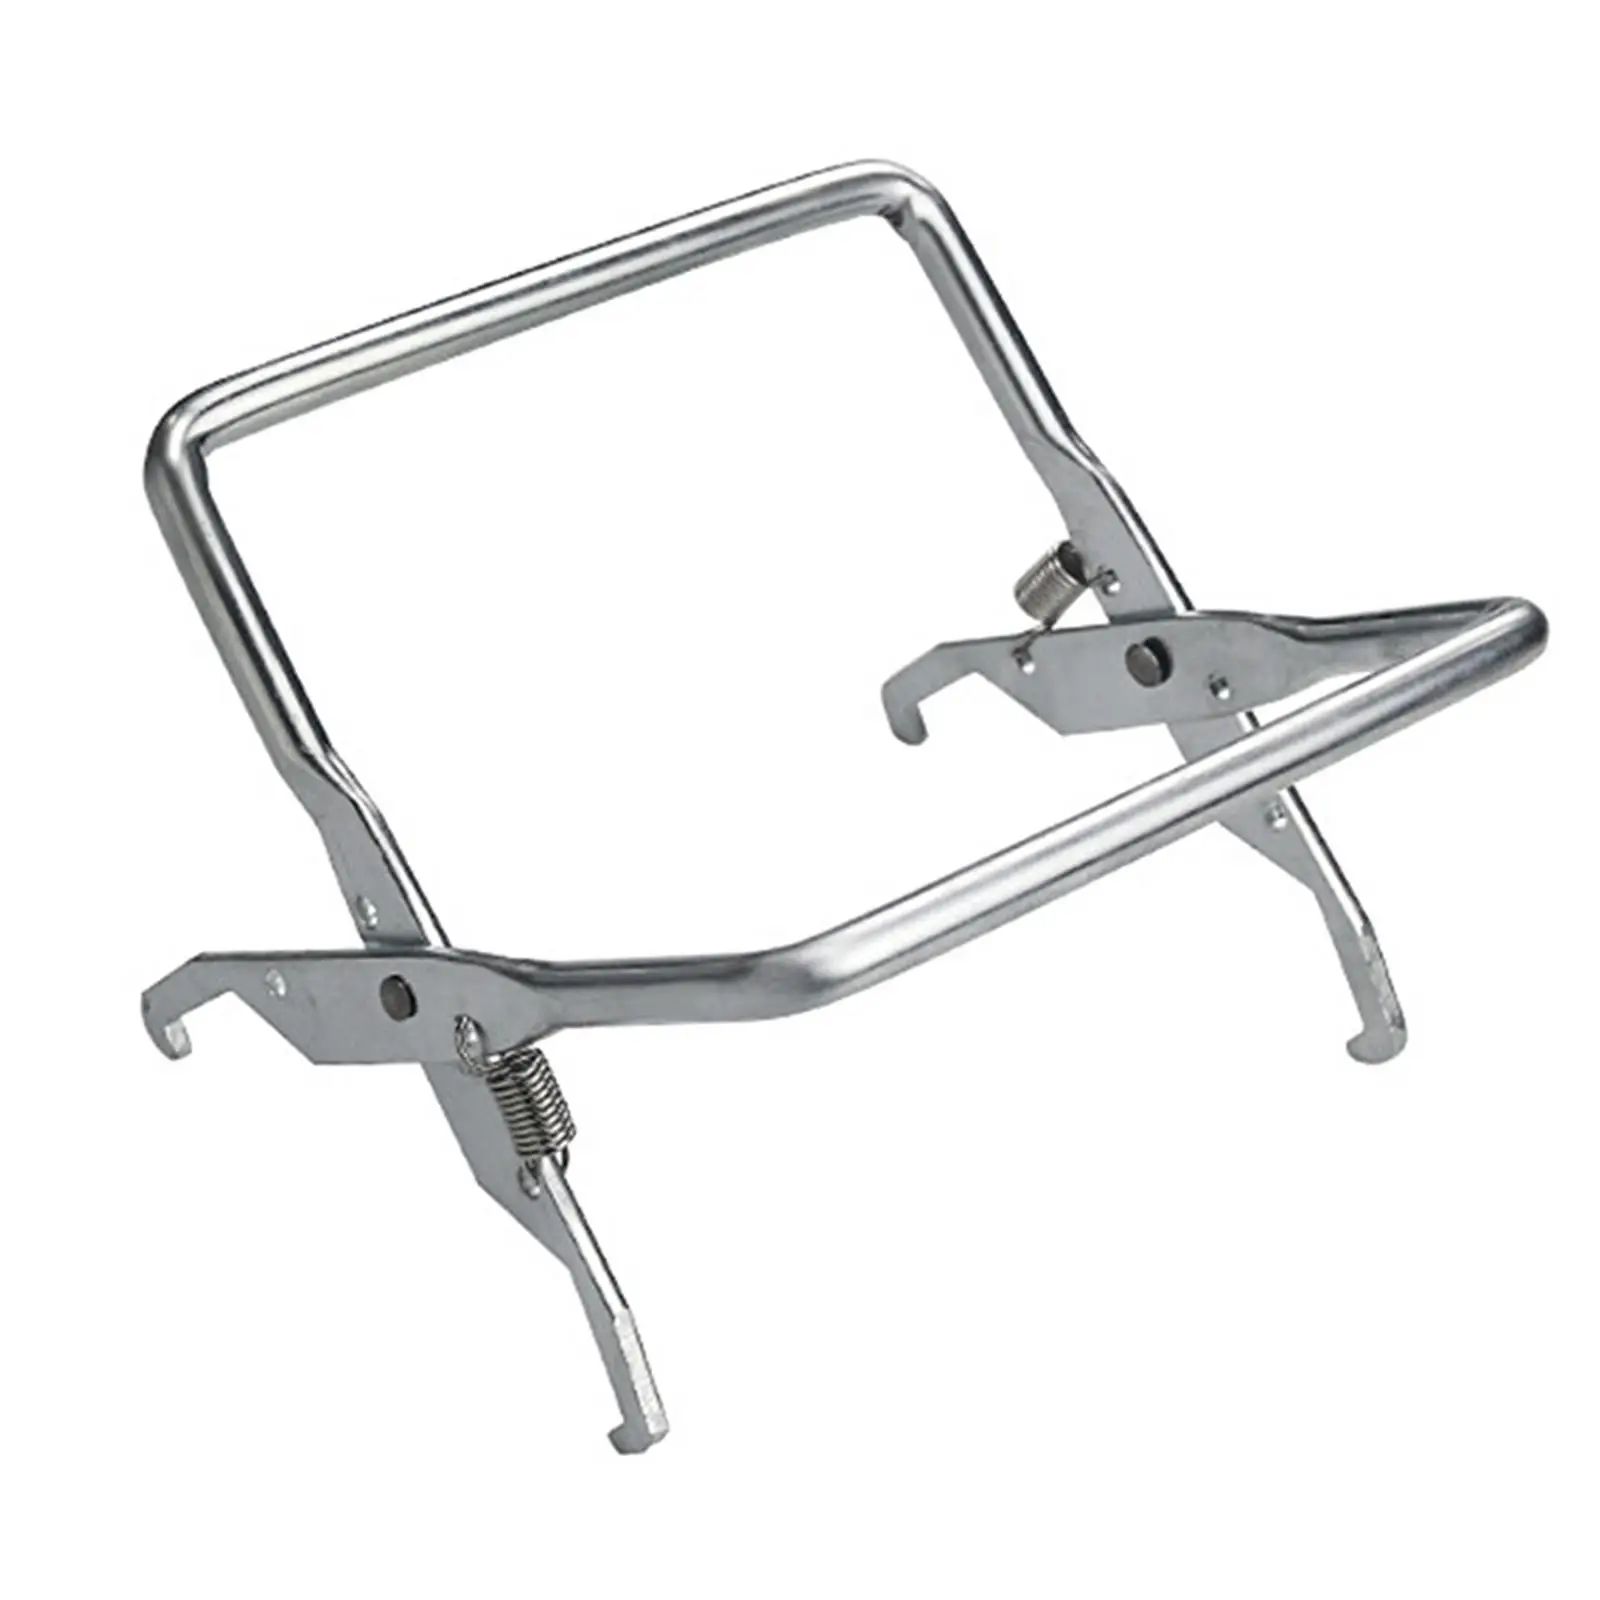 Bee Hive Frame Grip Holder Stainless Steel, for Beekeeper Accessories Durable High Performance